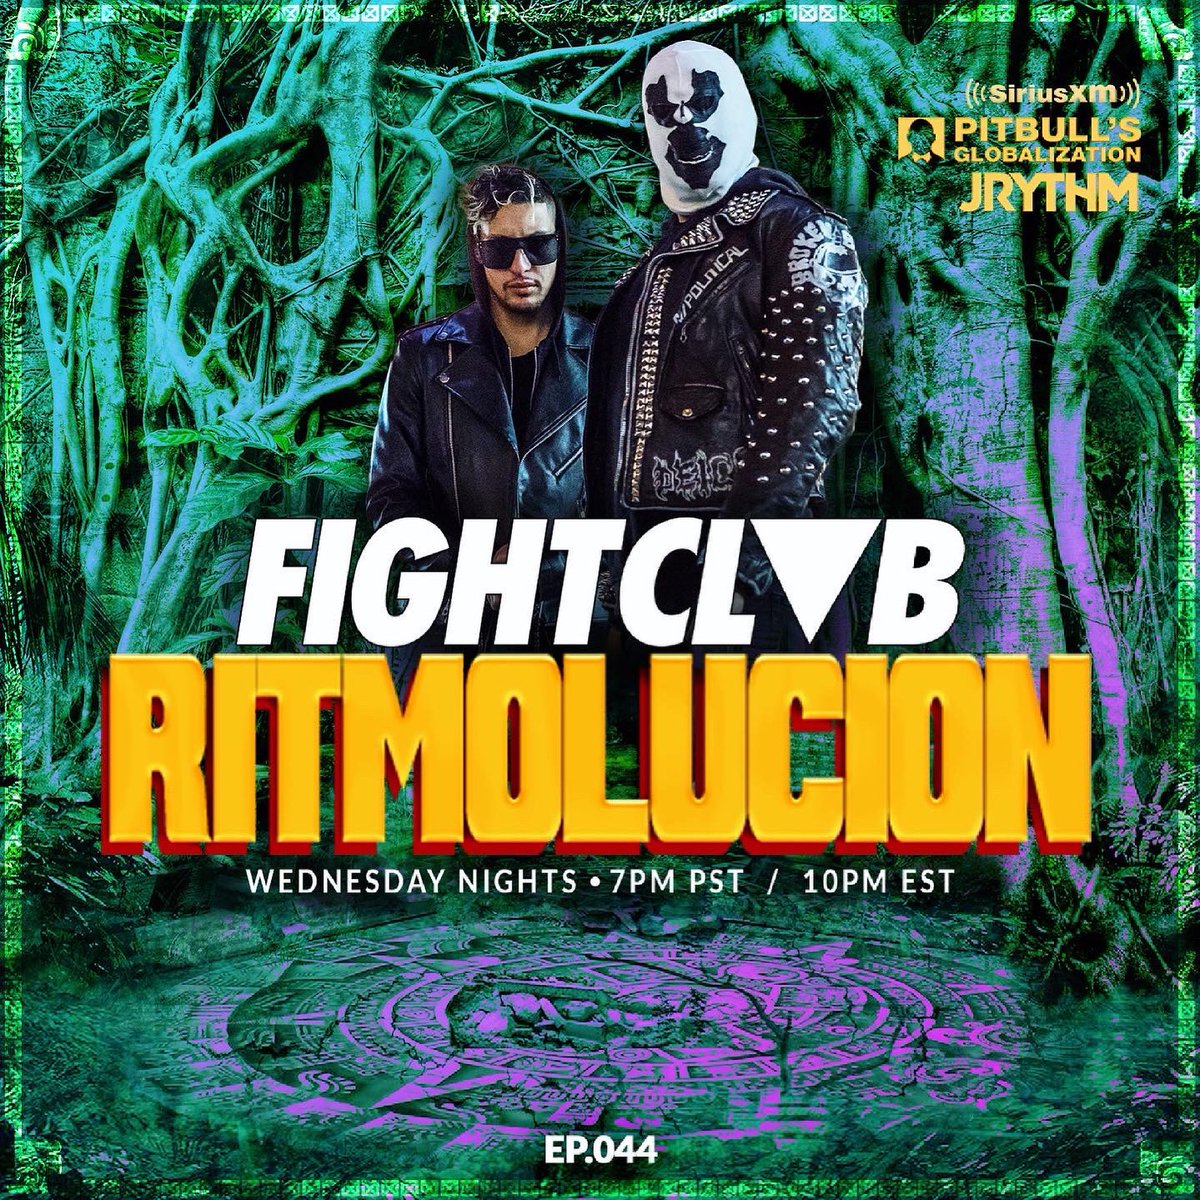 This episode featuring interview & guest mix with @FIGHTCLVBMUSIC is up now on @mixcloud just in case you missed it live. Full interview on YouTube coming soon hit the link below to listen! @jrythm @GlobalizationXM @SIRIUSXM #FightClvb #Colombia #NewYork Ritmolucion.com